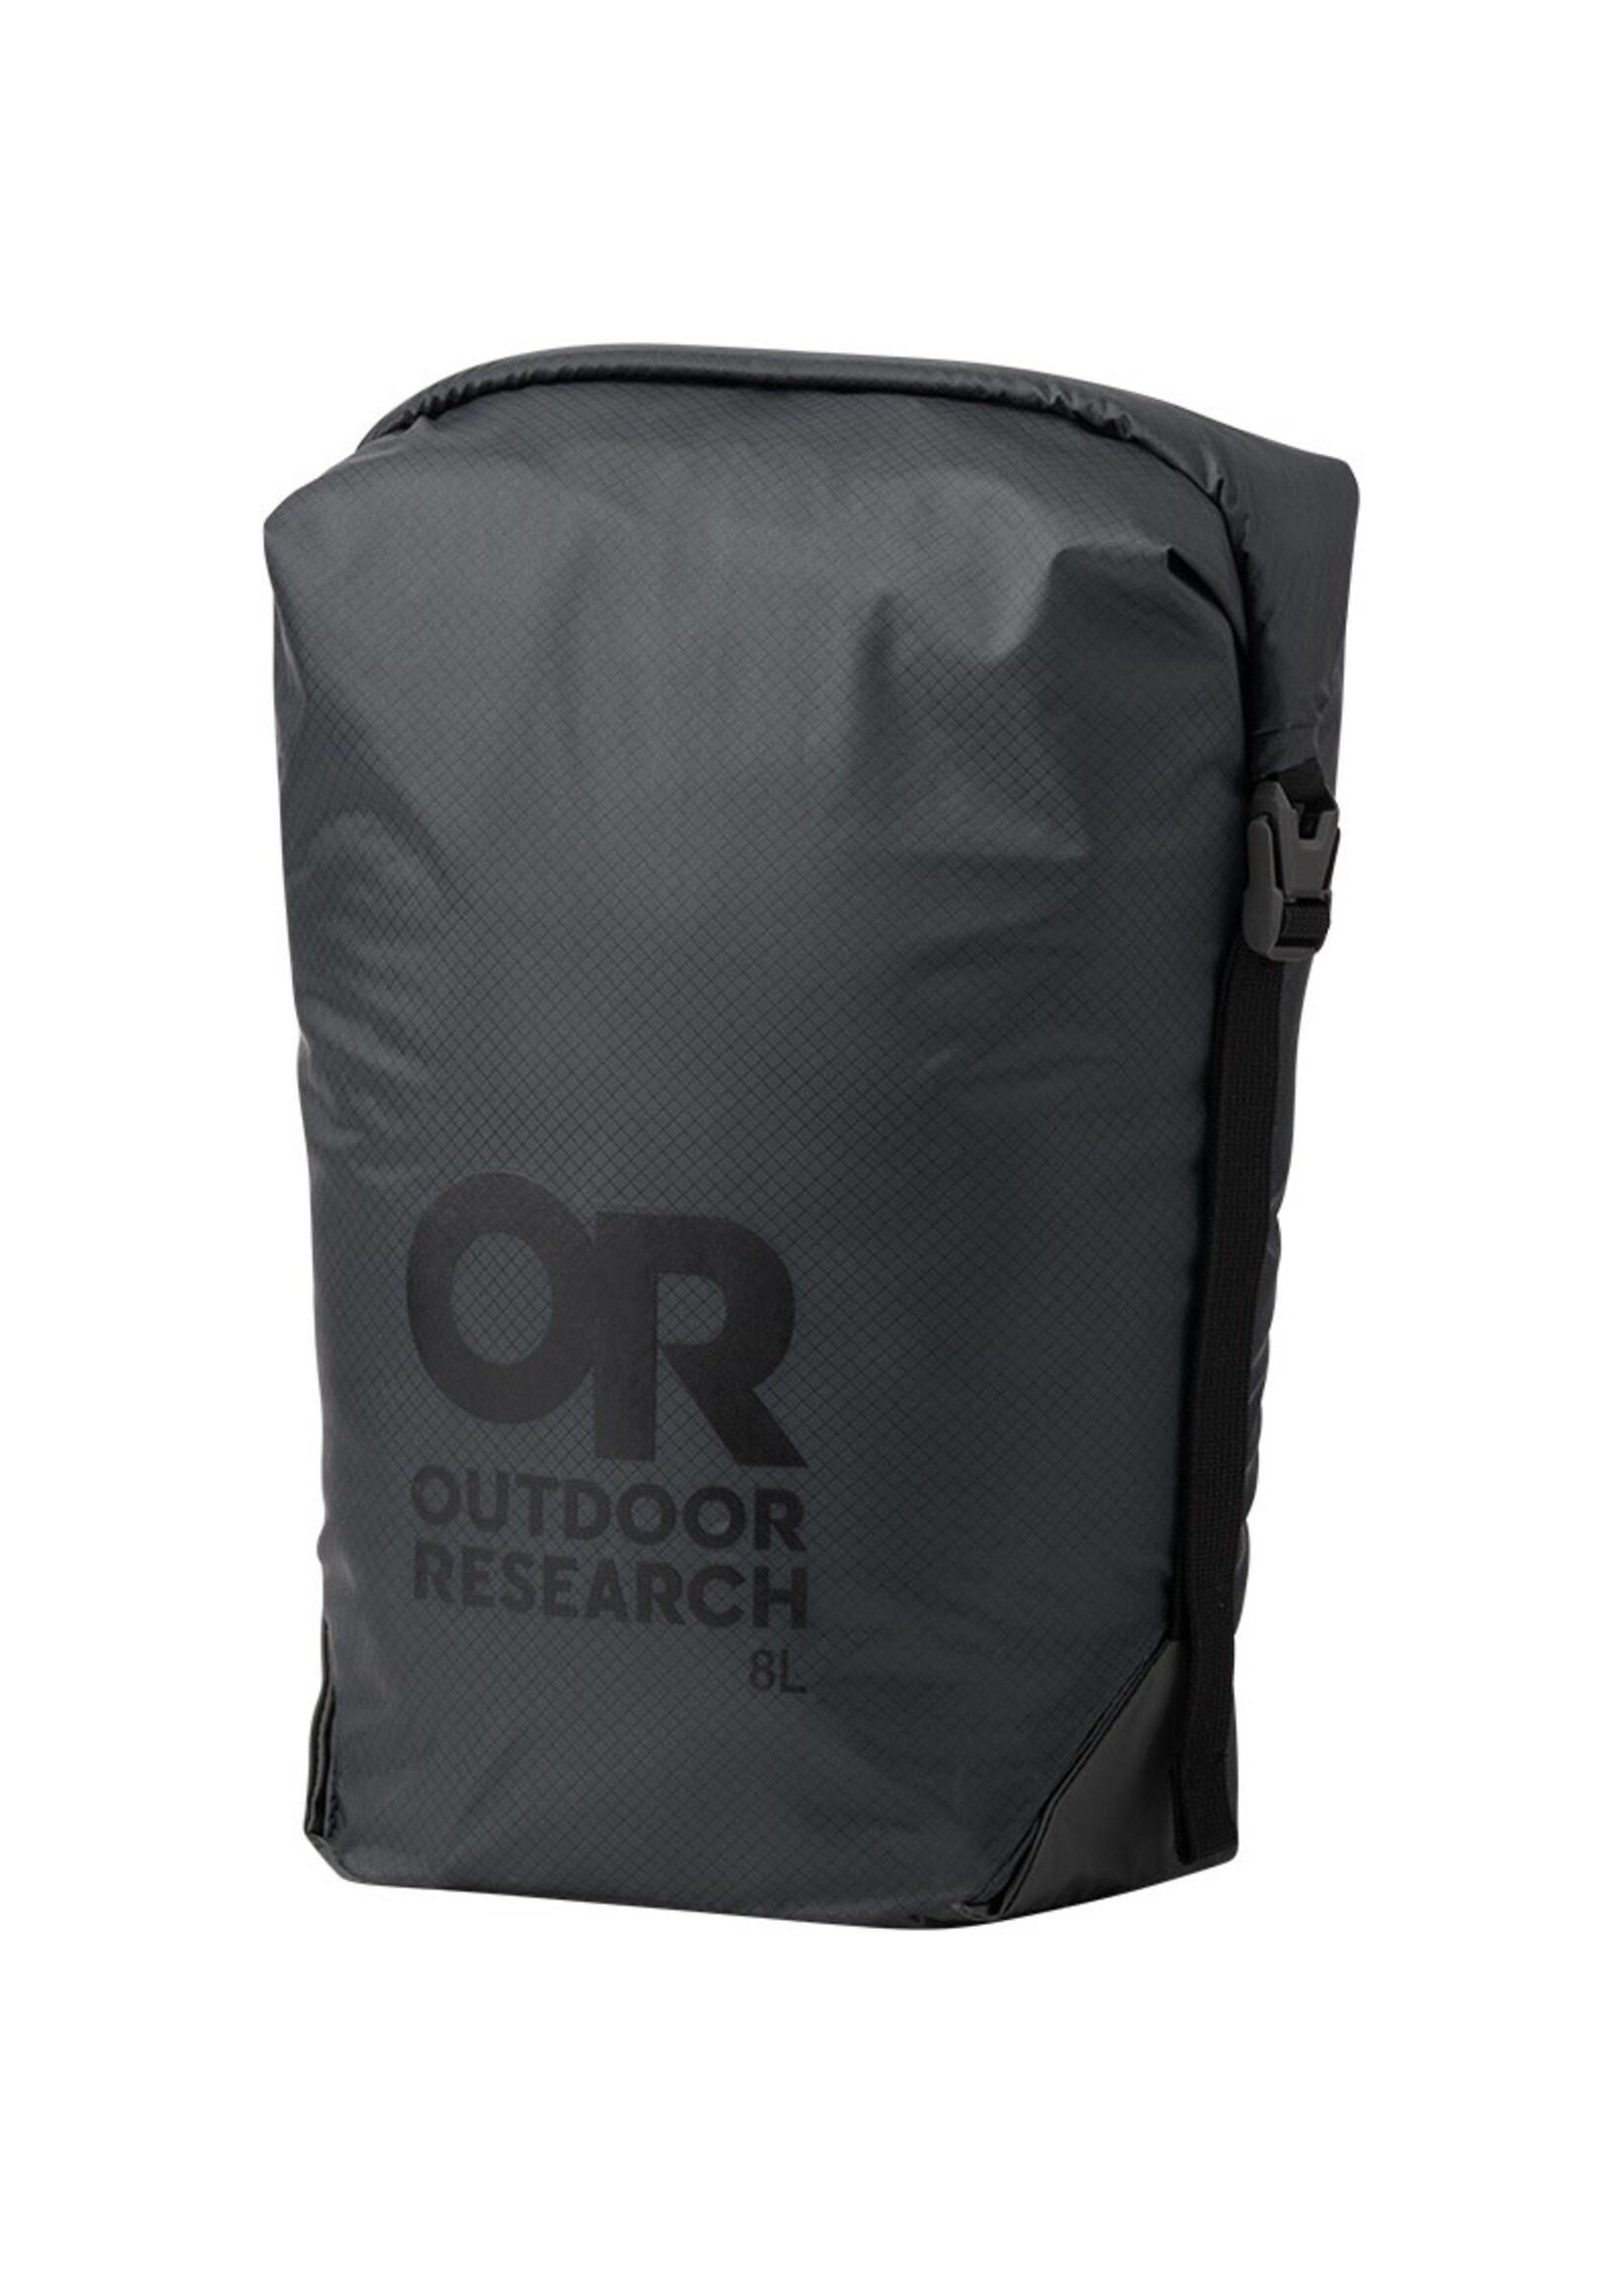 Outdoor Research Sac de compression Outdoor Research PackOut -  8L